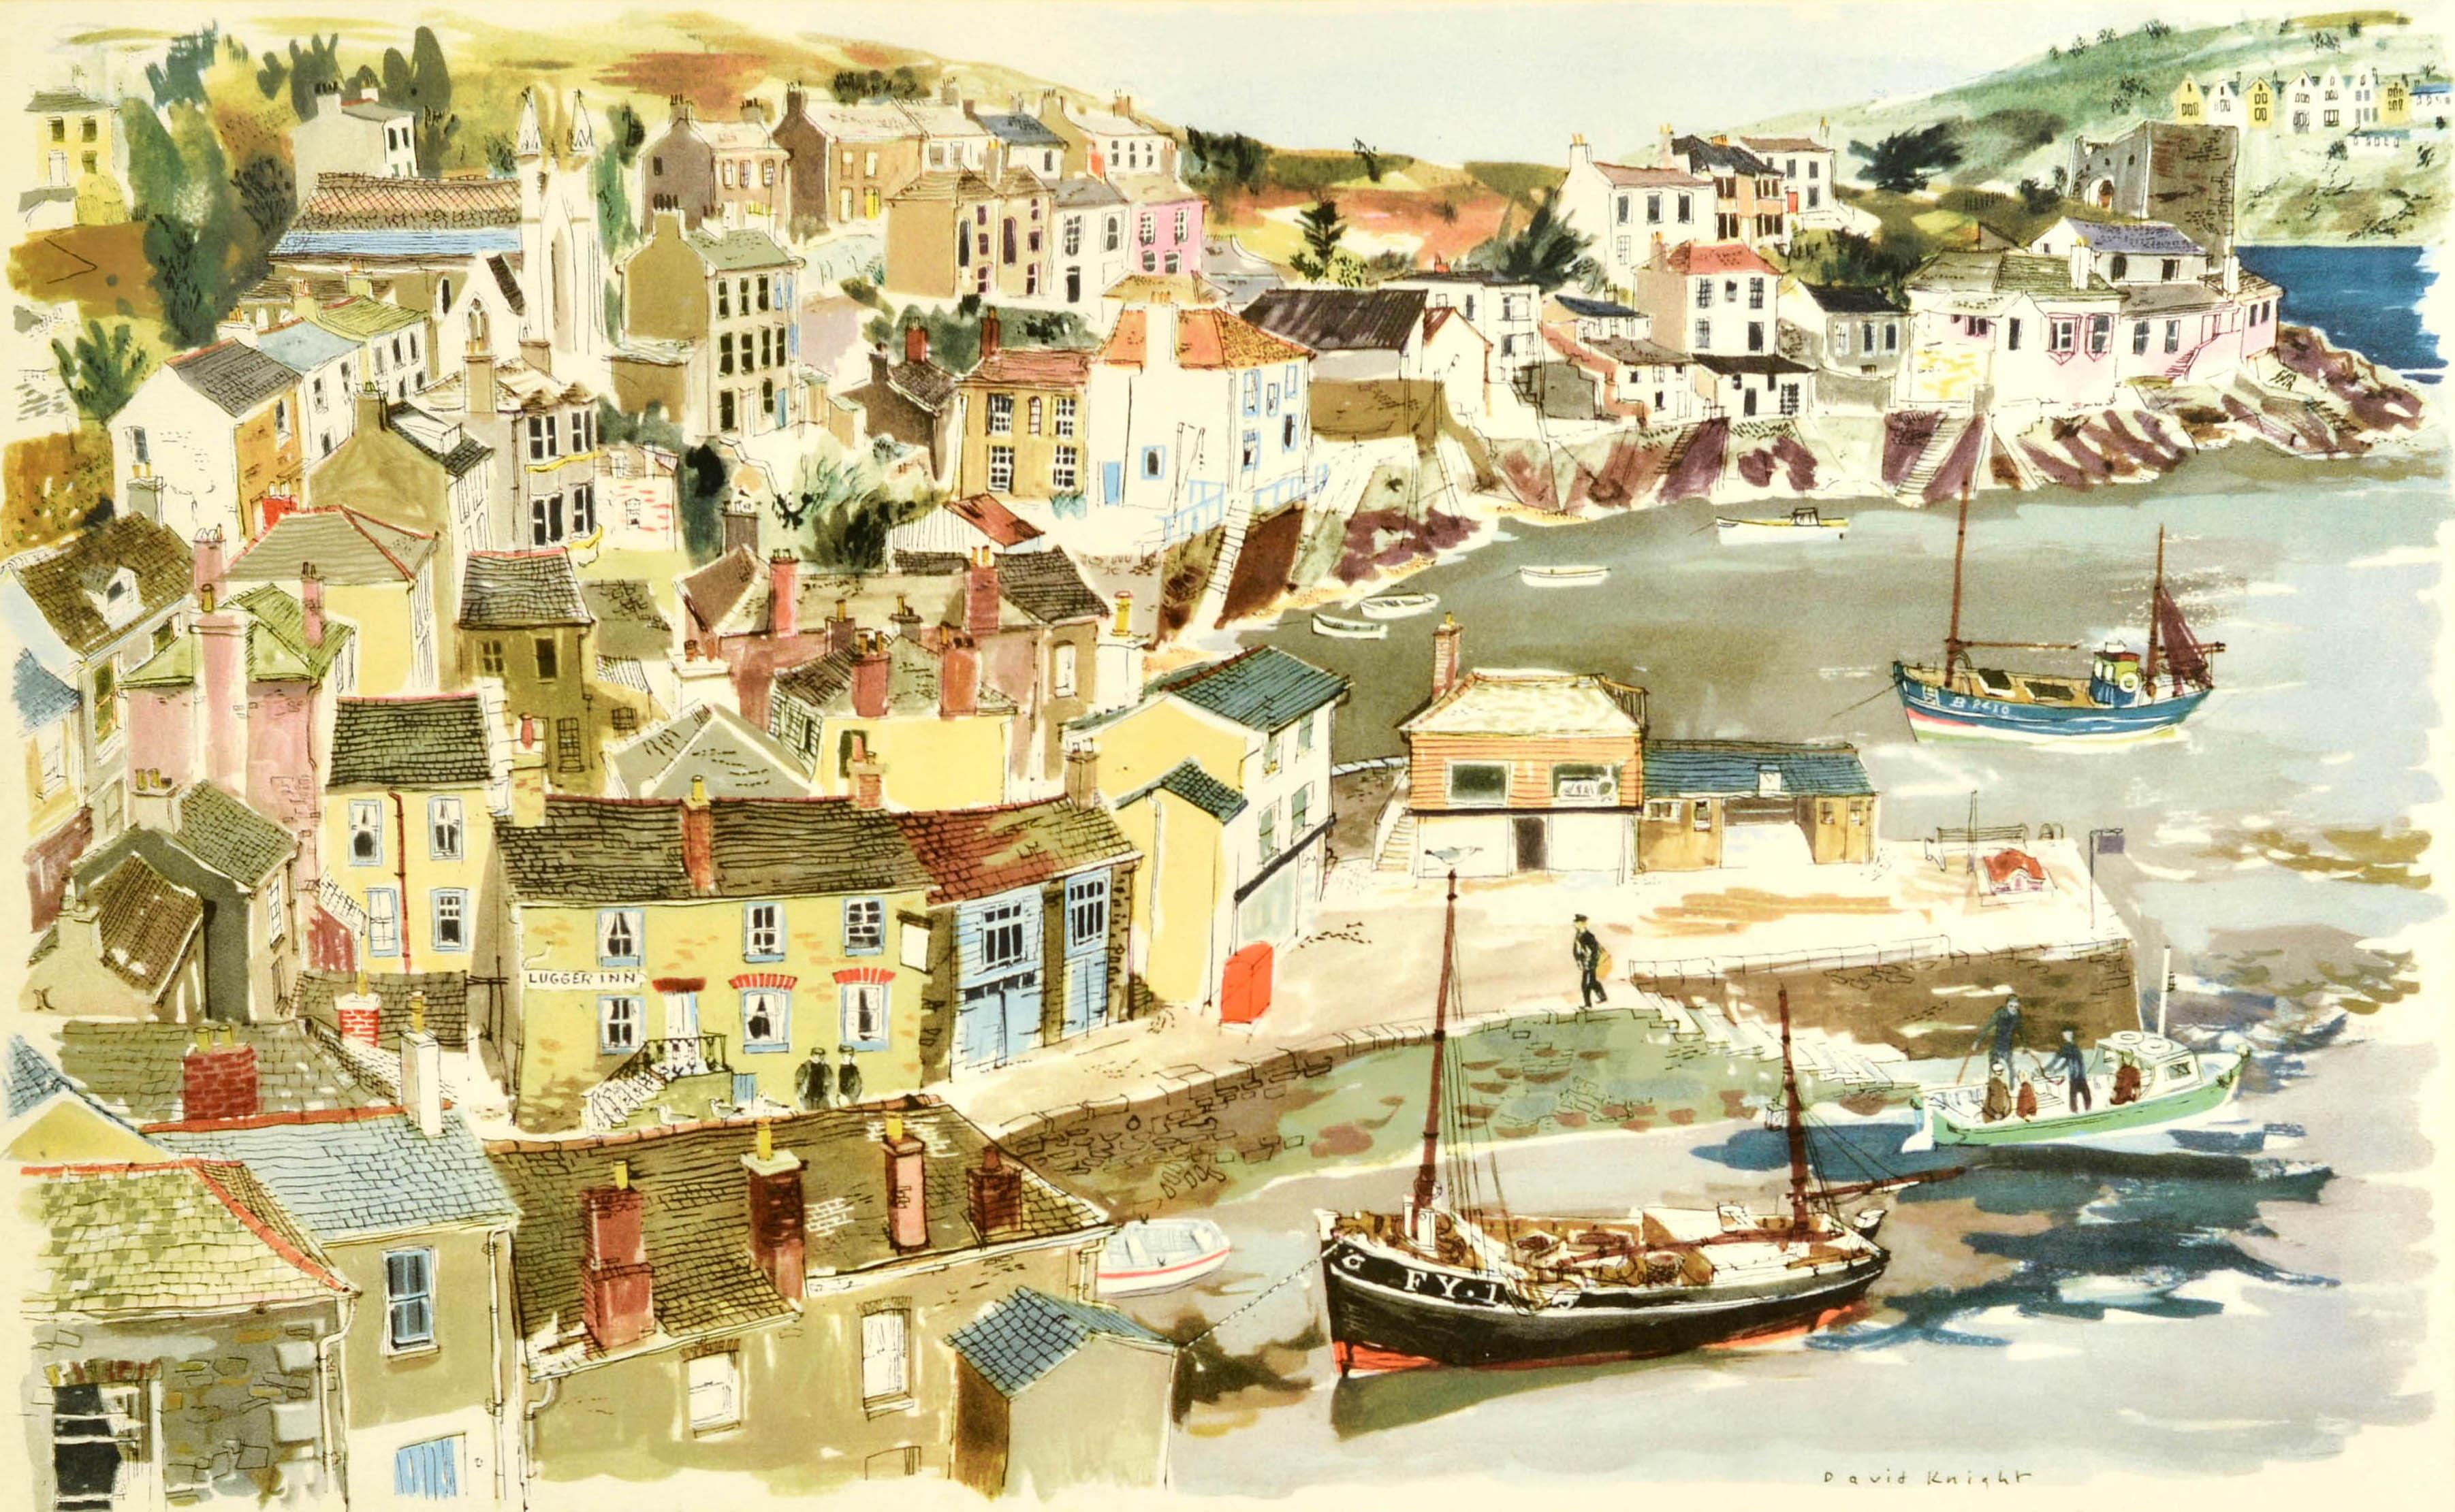 Original vintage post office advertising poster featuring a great artwork depicting buildings on the shore with boats at the pier, the caption below the image reads - Correct Address: Polruan, Fowey, Cornwall. Please use your correct address. GPO -